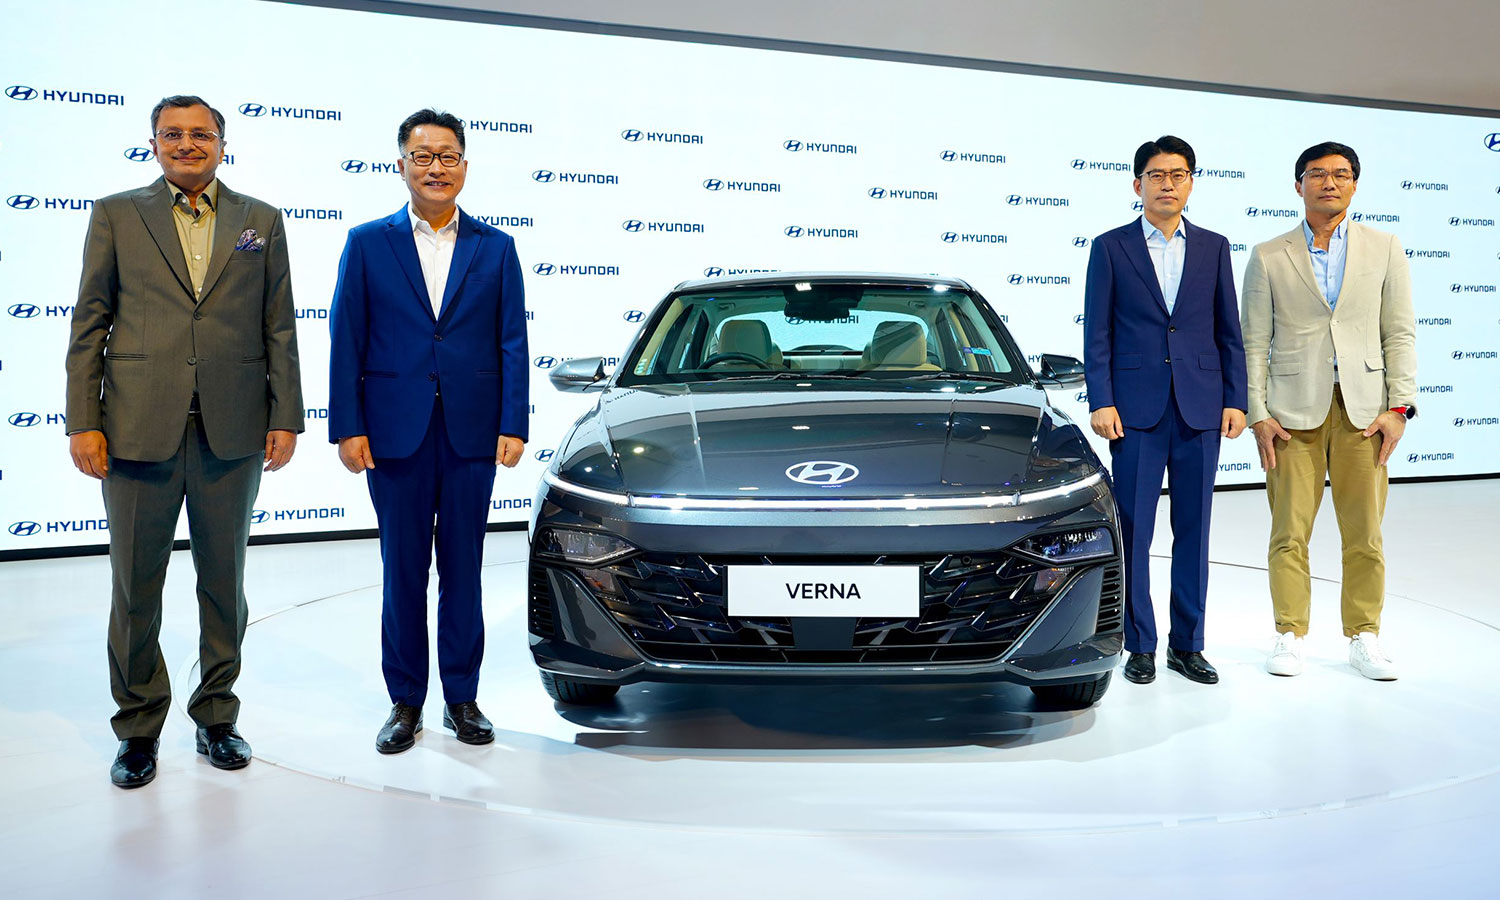 Rs.  2023 Hyundai Verna Launched in India at Rs 10.90 Lakh